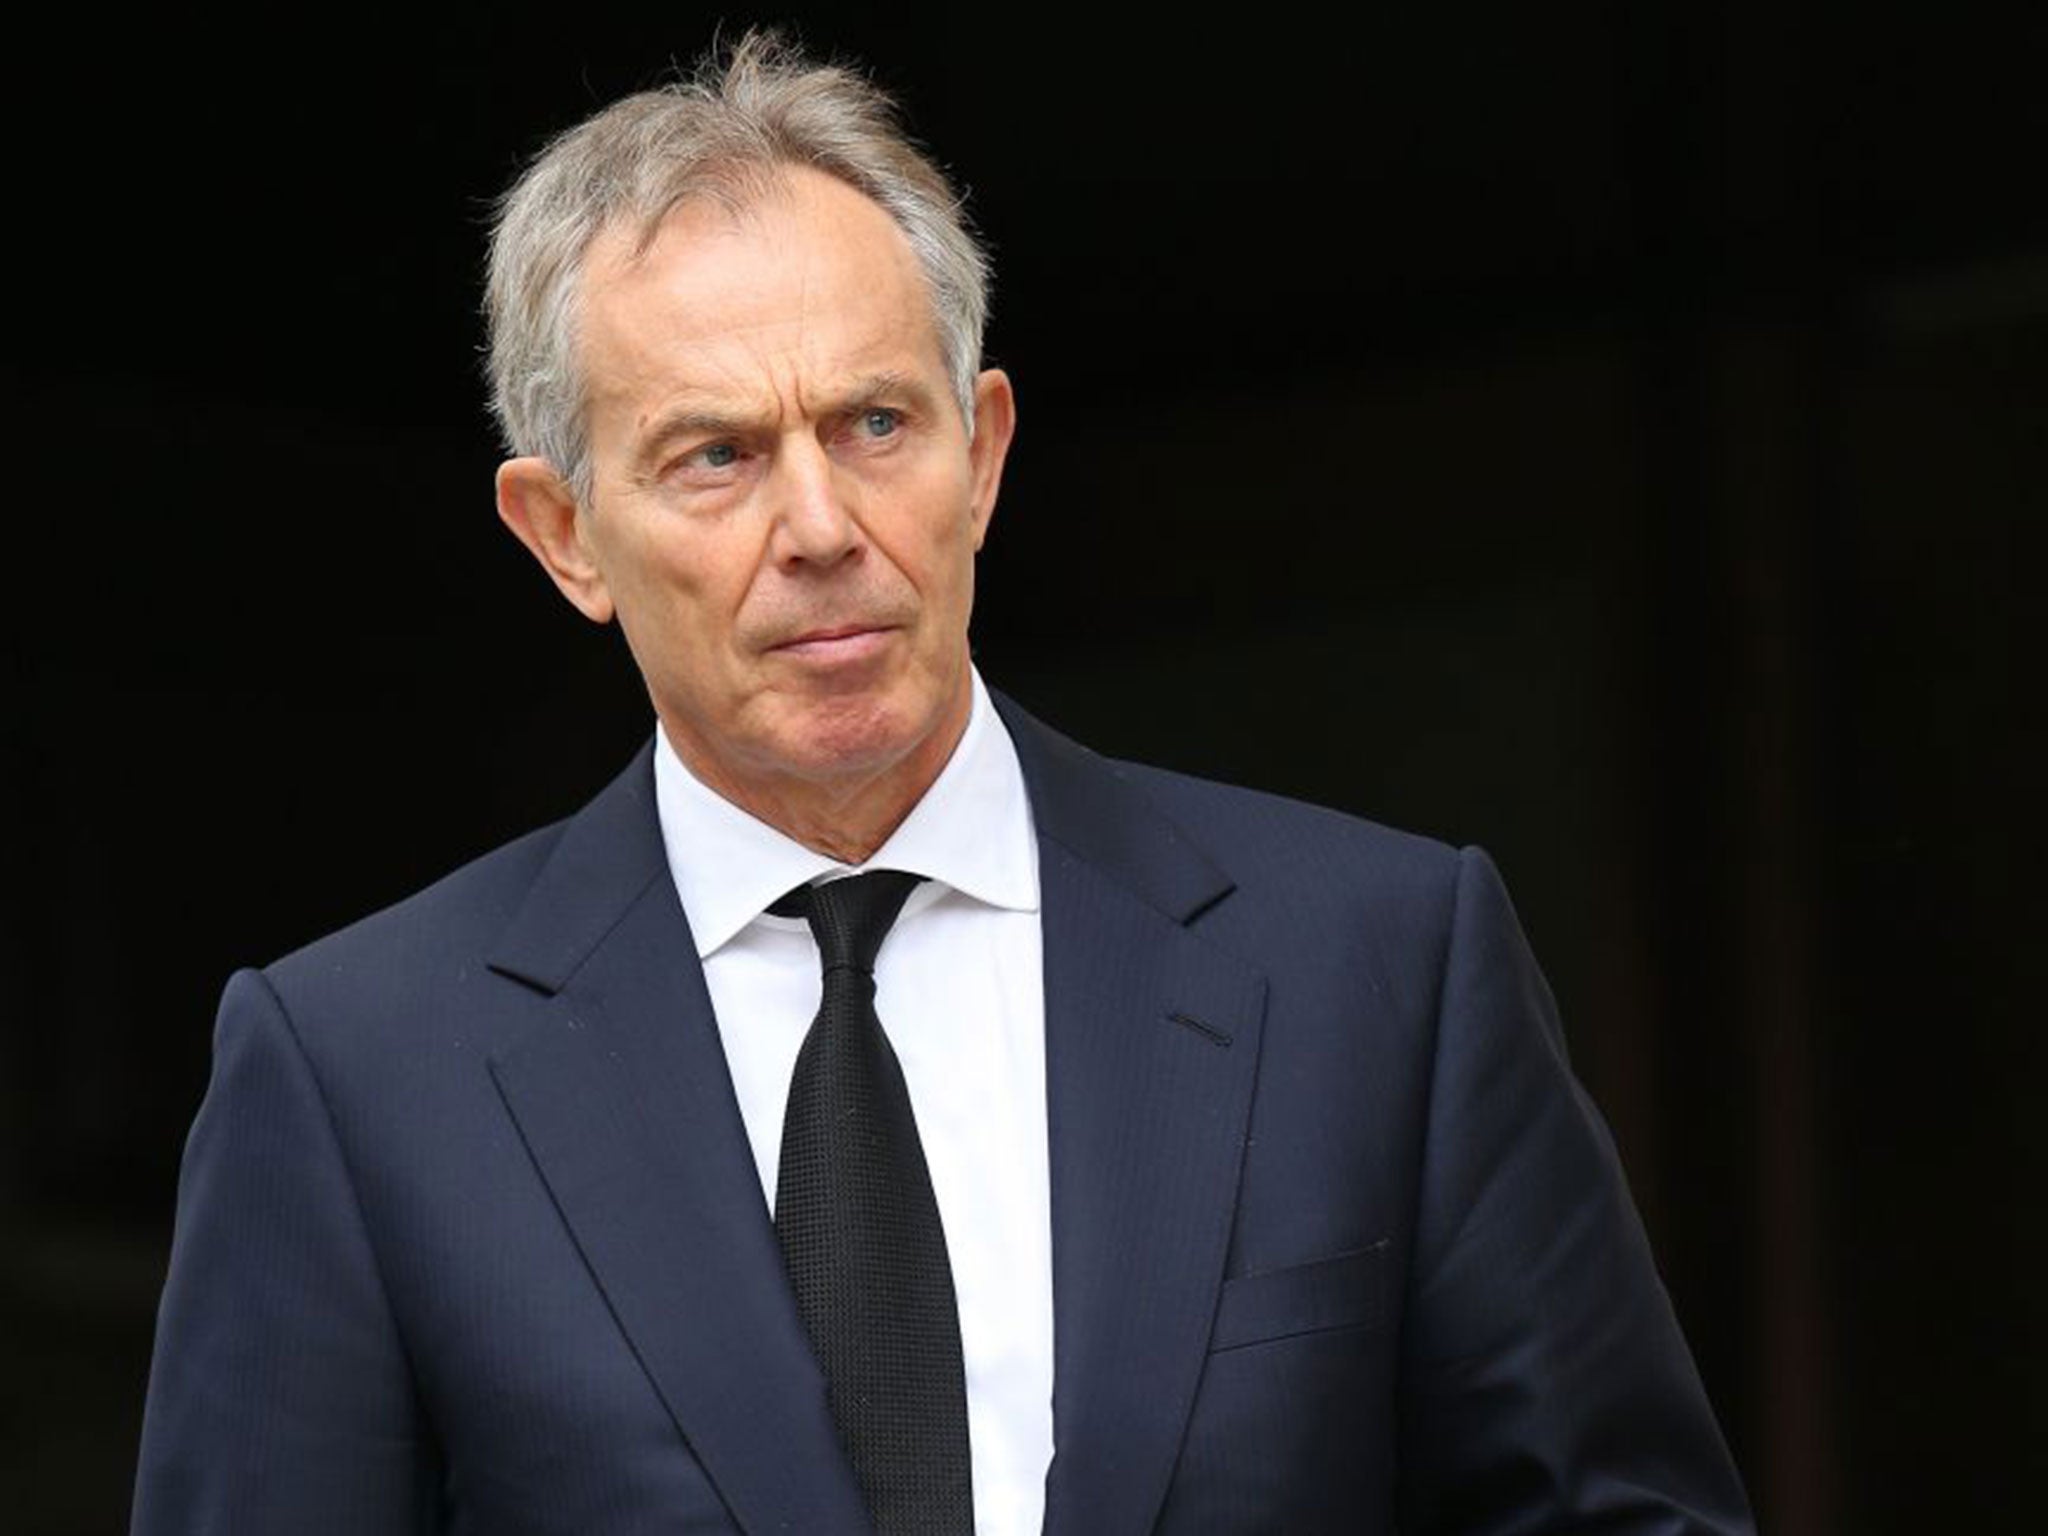 Tony Blair has written a 3,000-word essay in defence of the 2003 invasion